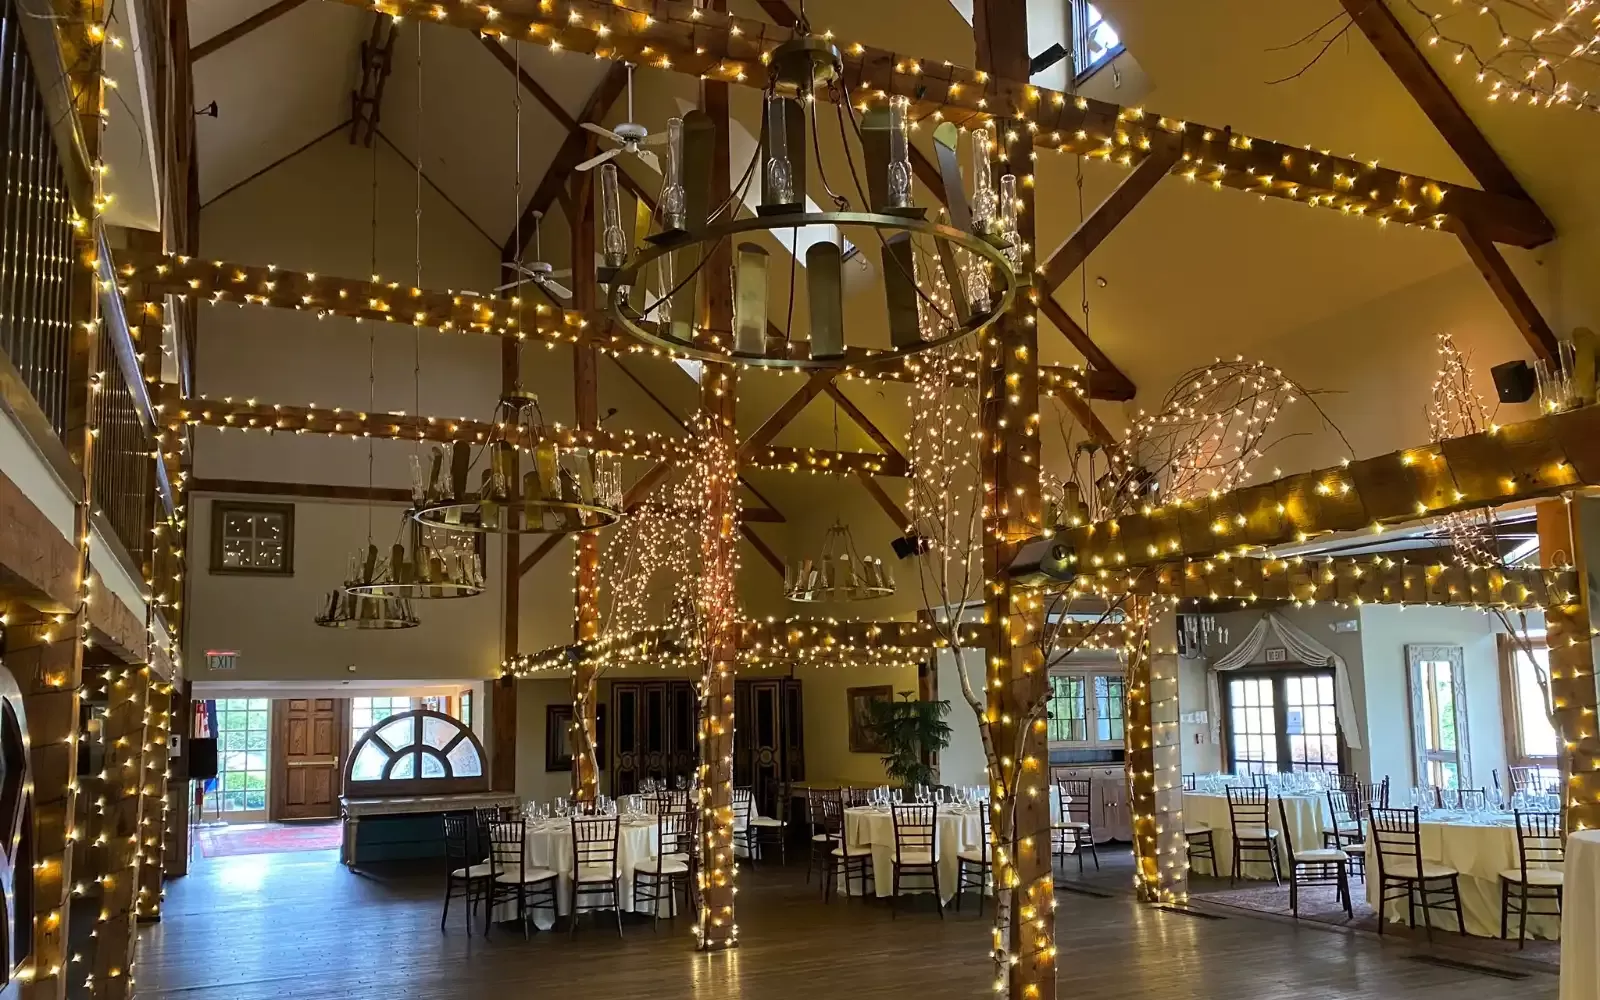 Wooden beams wrapped with lights